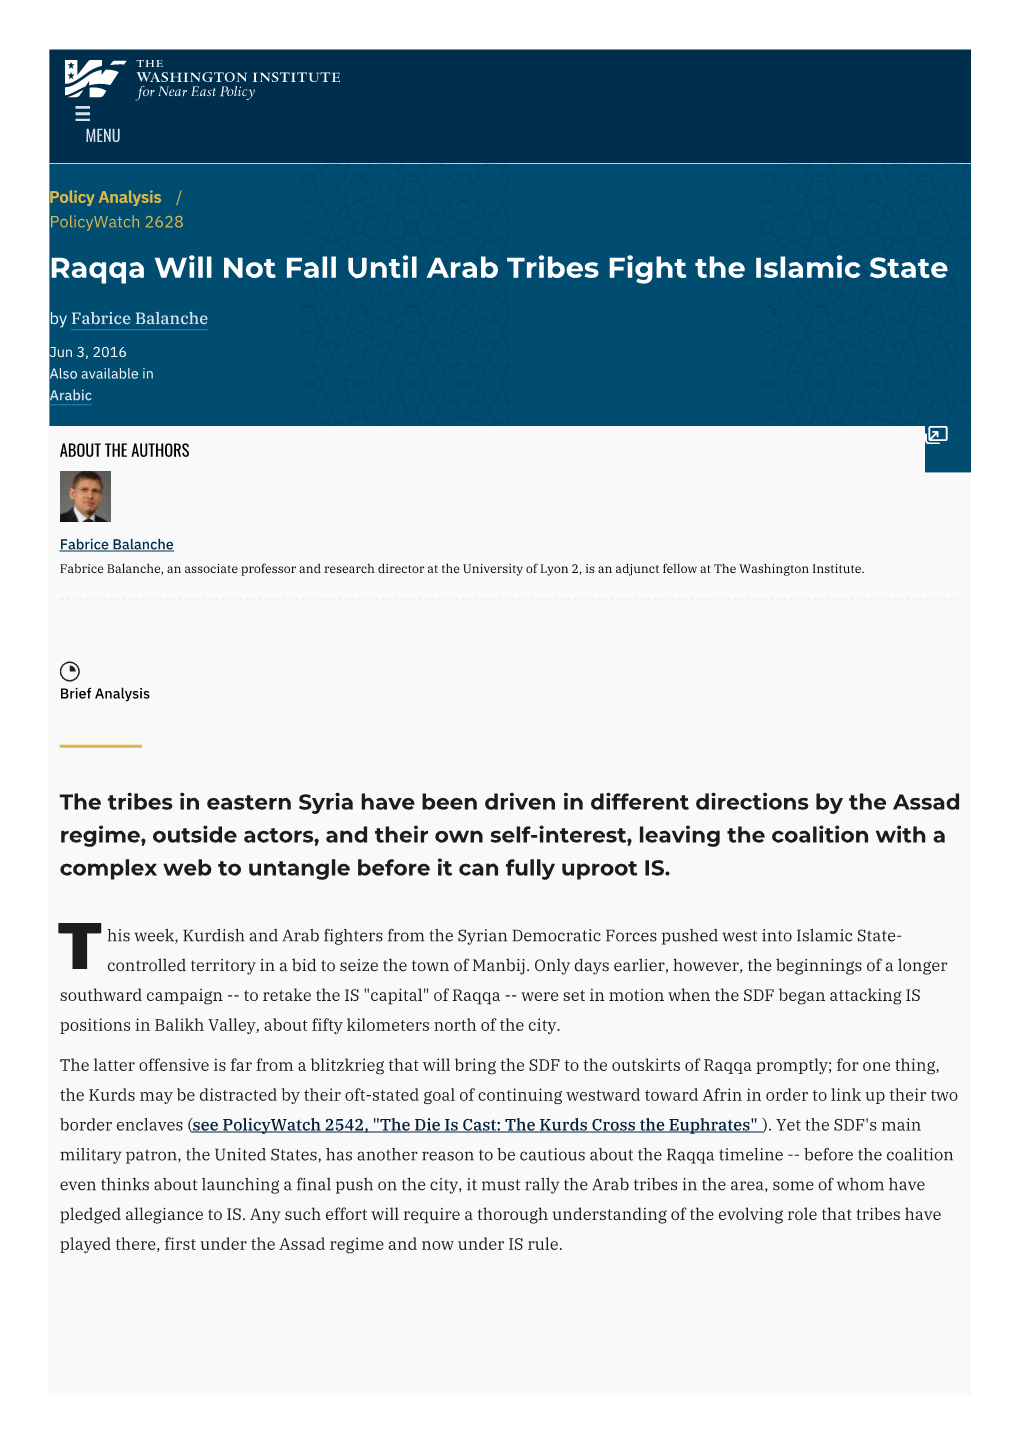 Raqqa Will Not Fall Until Arab Tribes Fight the Islamic State by Fabrice Balanche